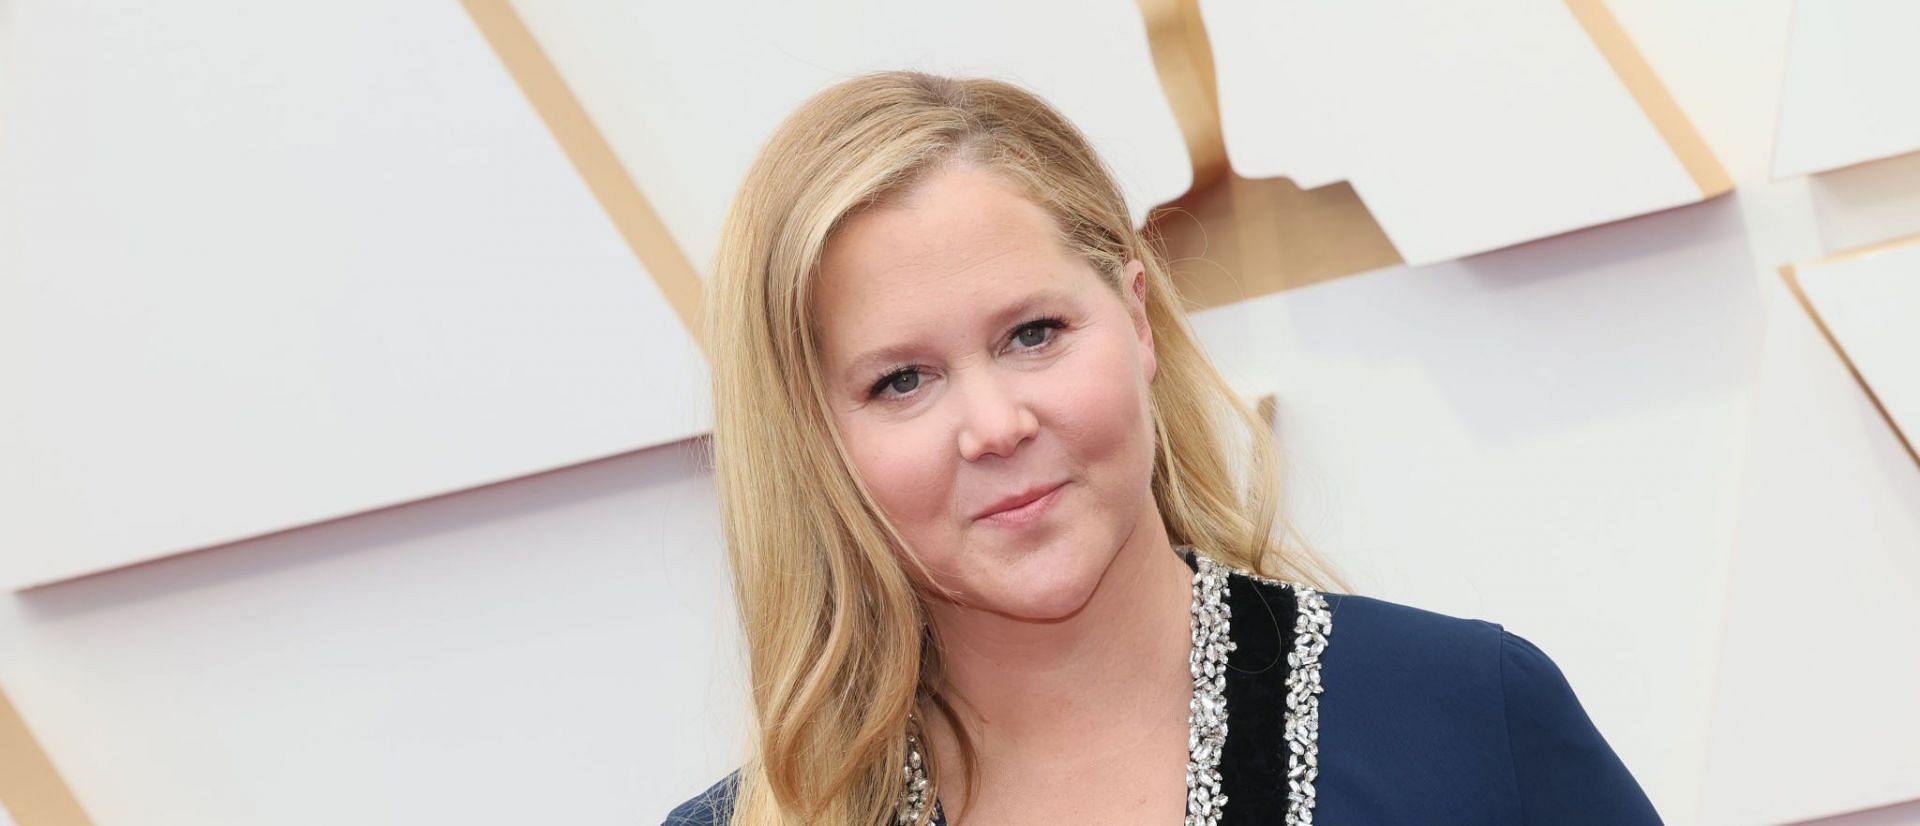 Twitter condemns Amy Schumer for making a joke about Alec Baldwin shooting incident (Image via David Livingston/Getty Images)